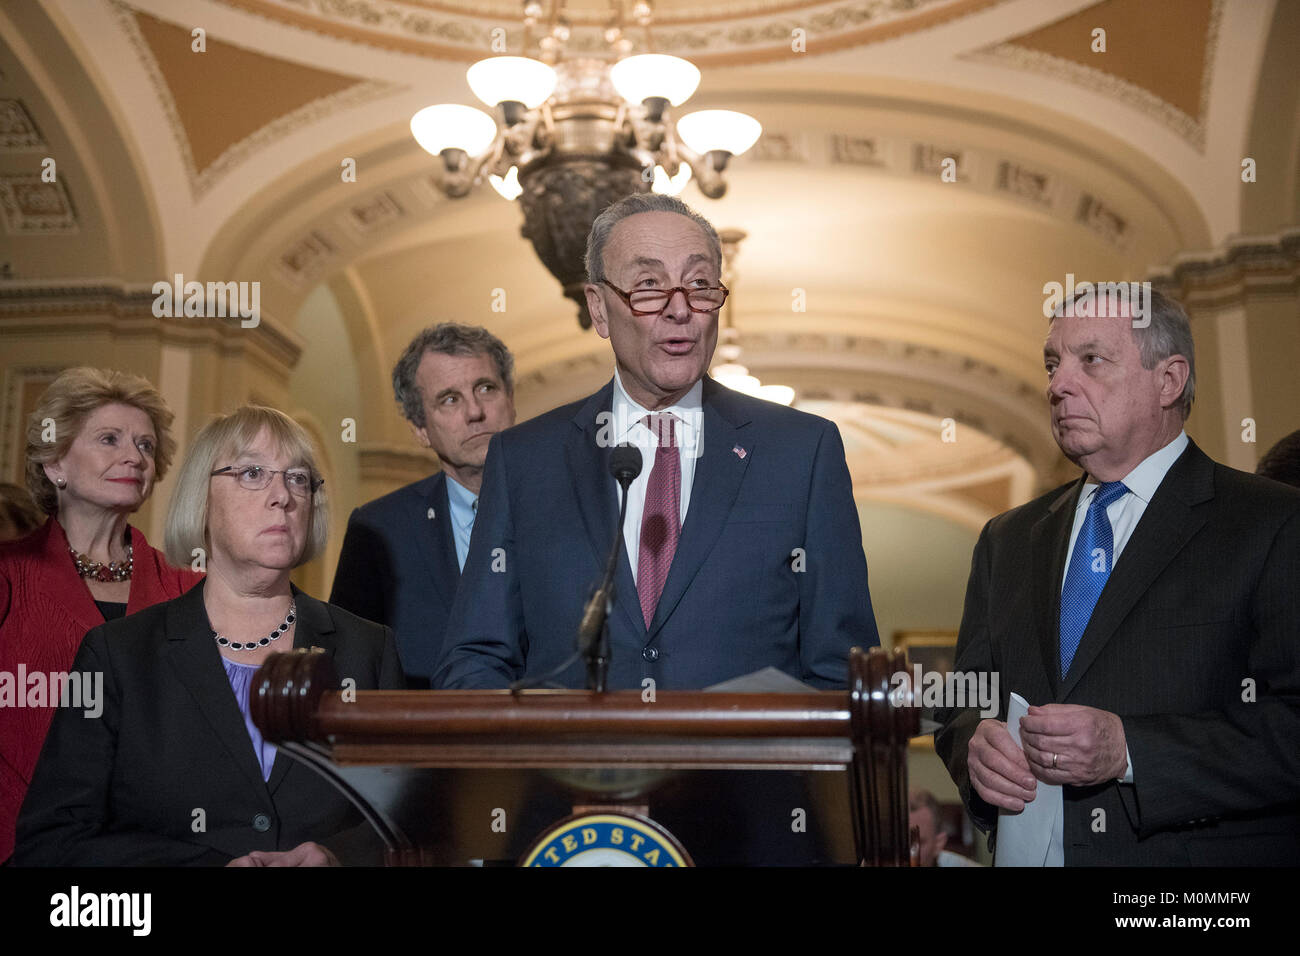 Washington, United States Of America. 23rd Jan, 2018. United States Senate Minority Leader Chuck Schumer (Democrat of New York) make remarks following the Democratic Party policy luncheon in the US Capitol in Washington, DC on Tuesday, January 23, 2018. Pictured from left to right: US Senator Debbie Stabenow (Democrat of Michigan), US Senator Patty Murray (Democrat of Washington), US Senator Sherrod Brown (Democrat of Ohio), Leader Schumer, and US Senator Dick Durbin (Democrat of Illinois). Credit: Ron Sachs/CNP Photo via Credit: Newscom/Alamy Live News Stock Photo